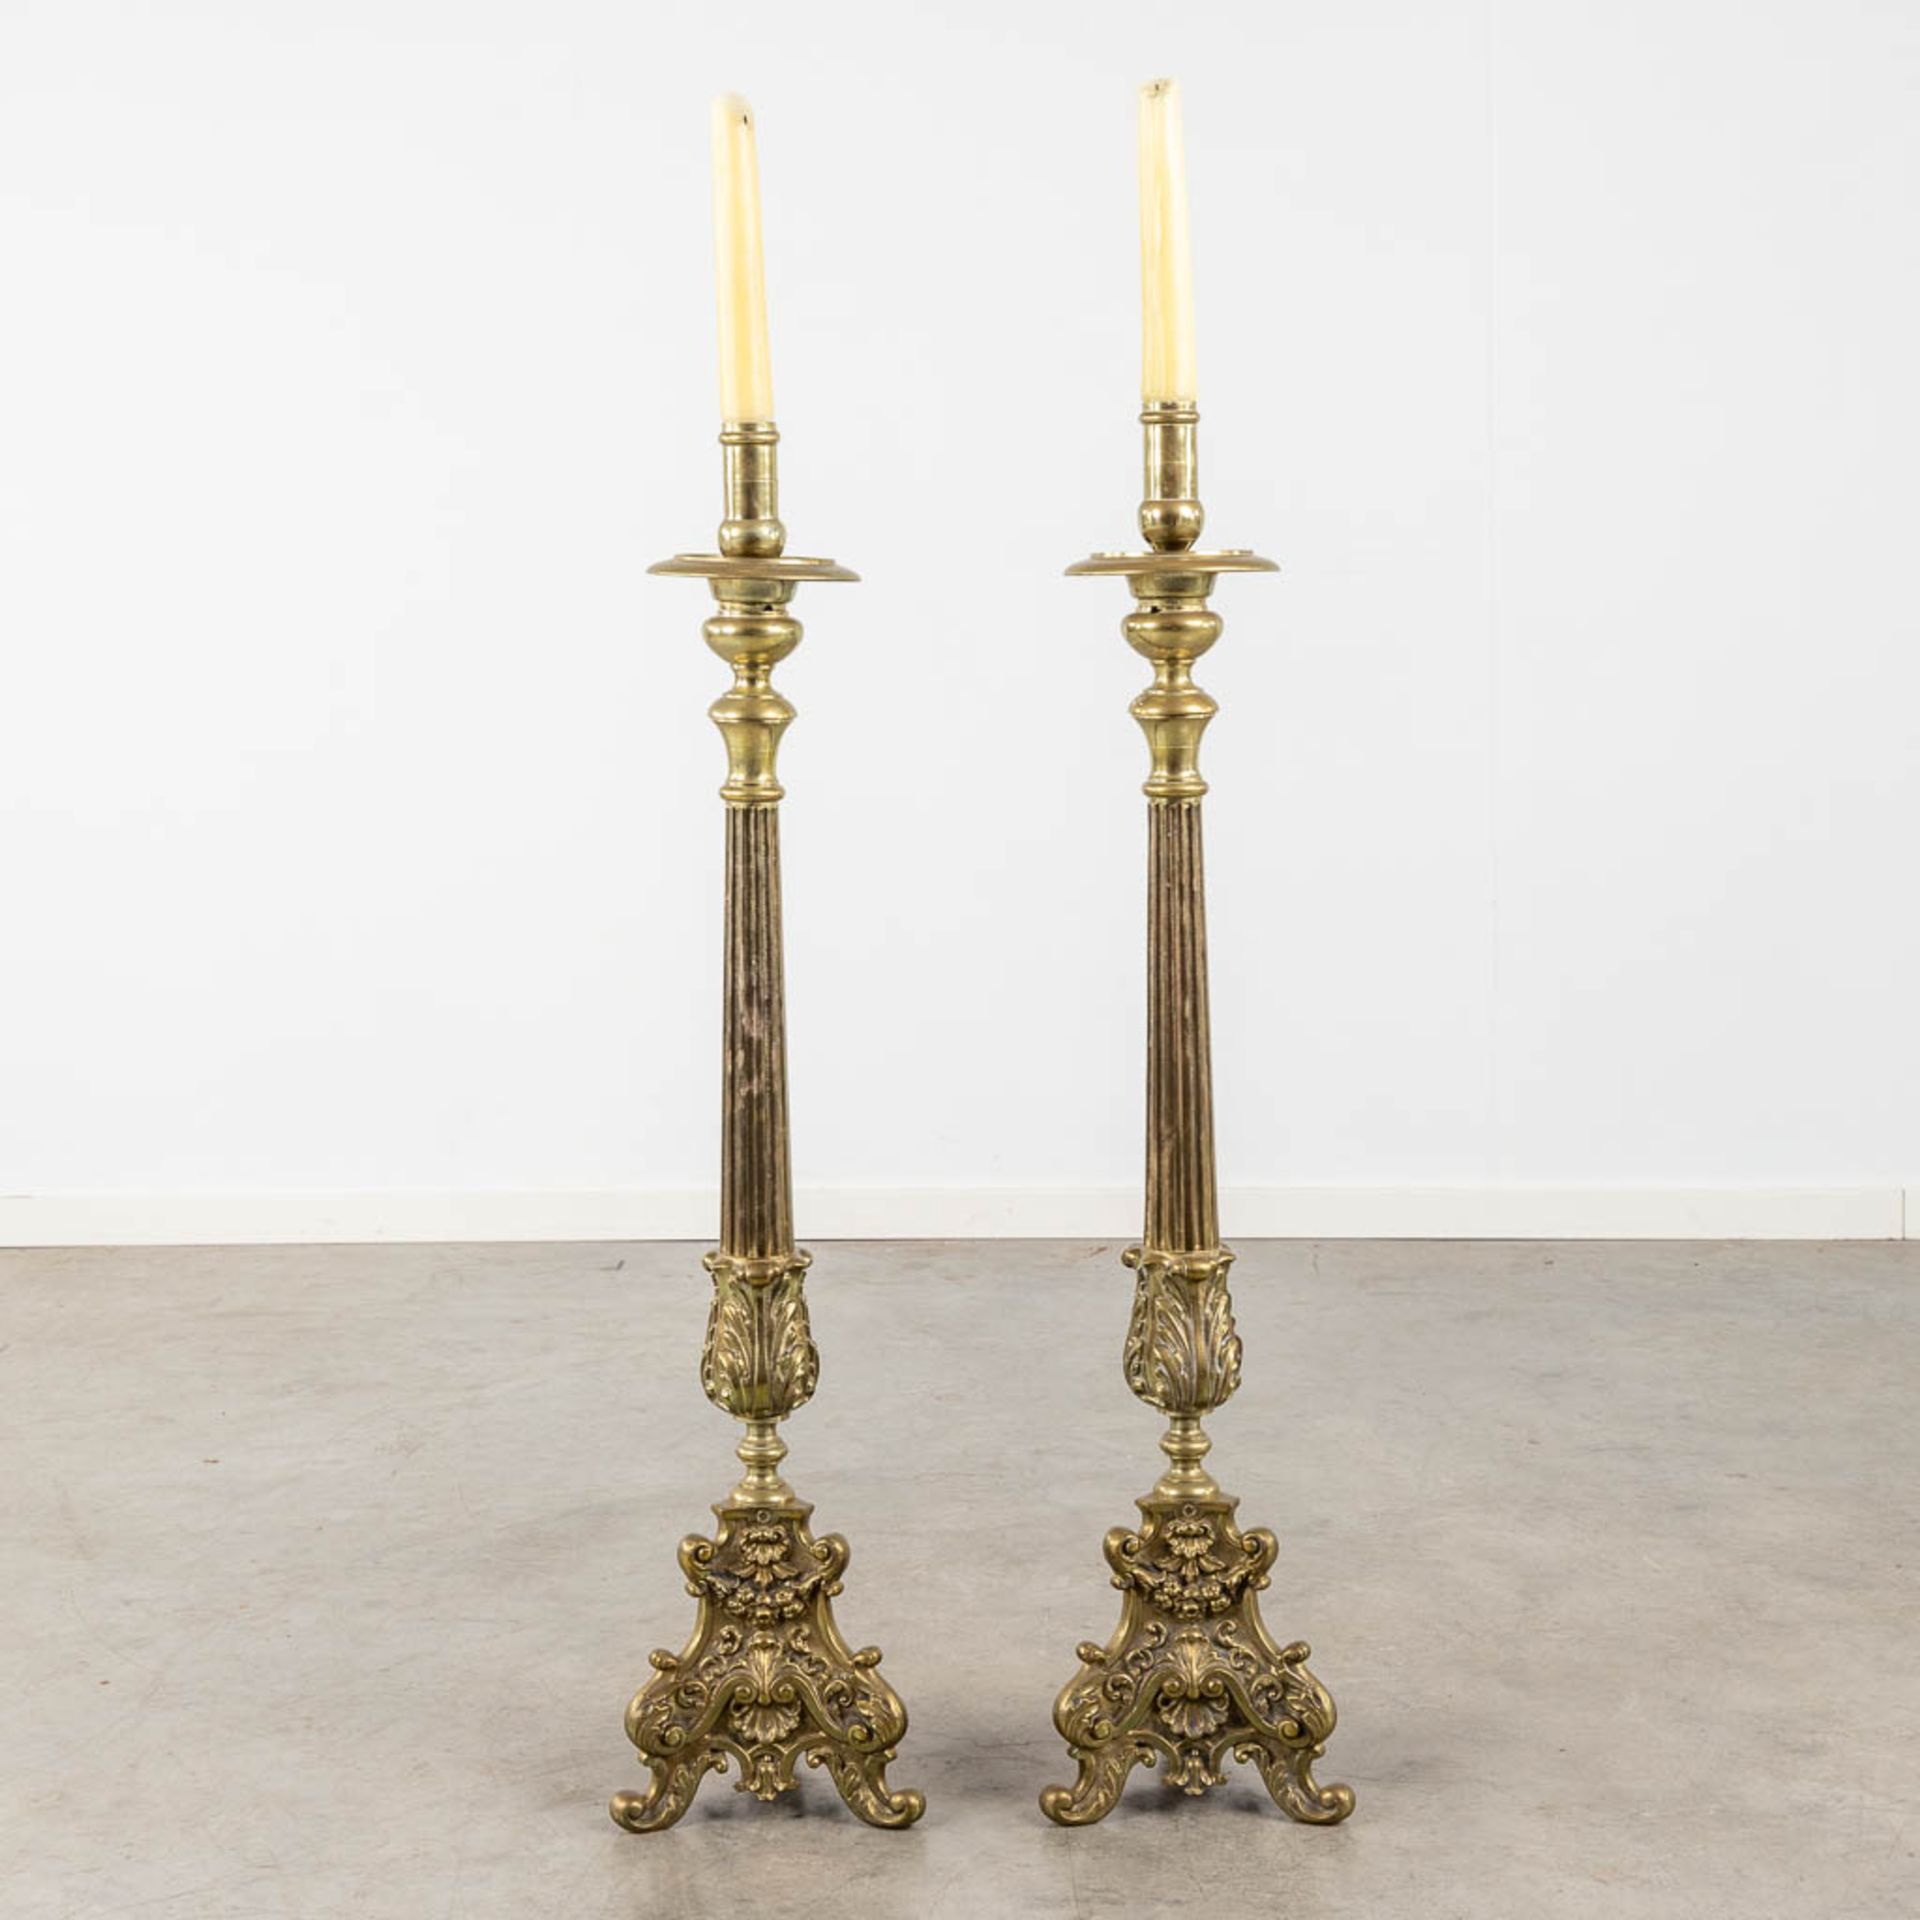 A pair of bronze church candlesticks/candle holders, Louis XV style. Circa 1900. (W:23 x H:105 cm)